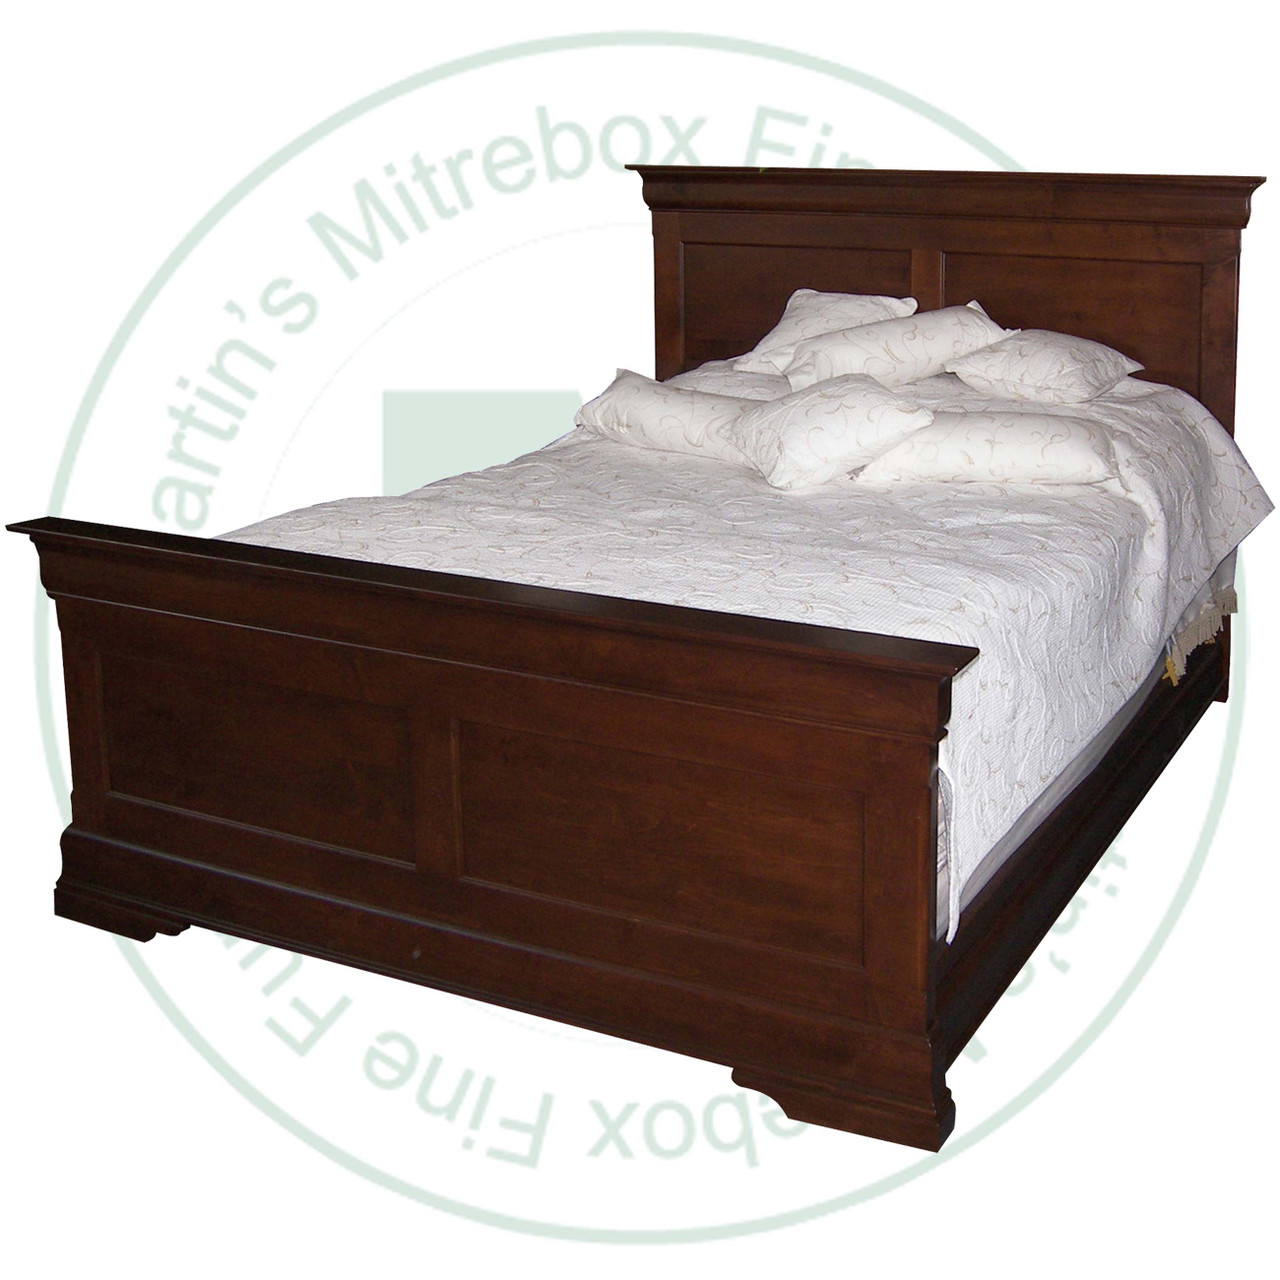 Maple Phillipe King Bed With High Footboard